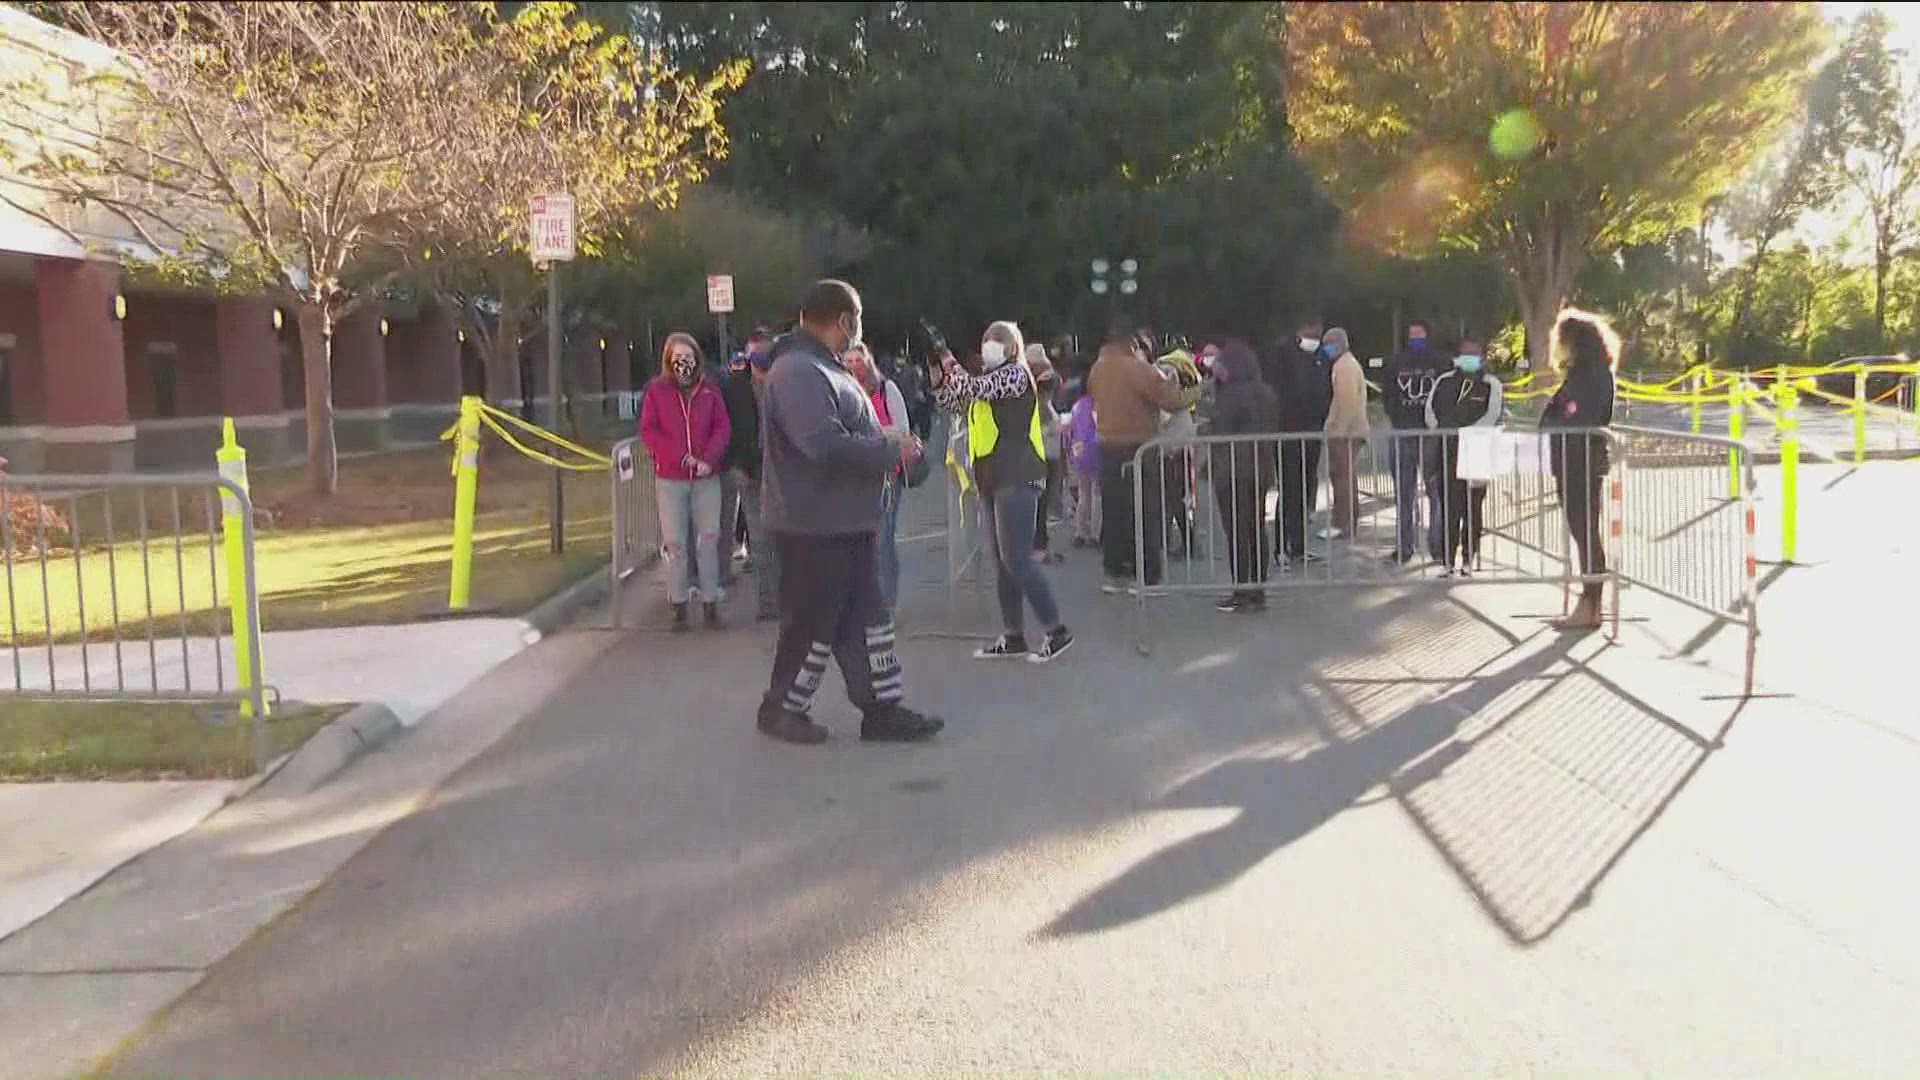 Voters stood in lines that were hours-long early Saturday morning as they waited patiently for early voting in Marietta.